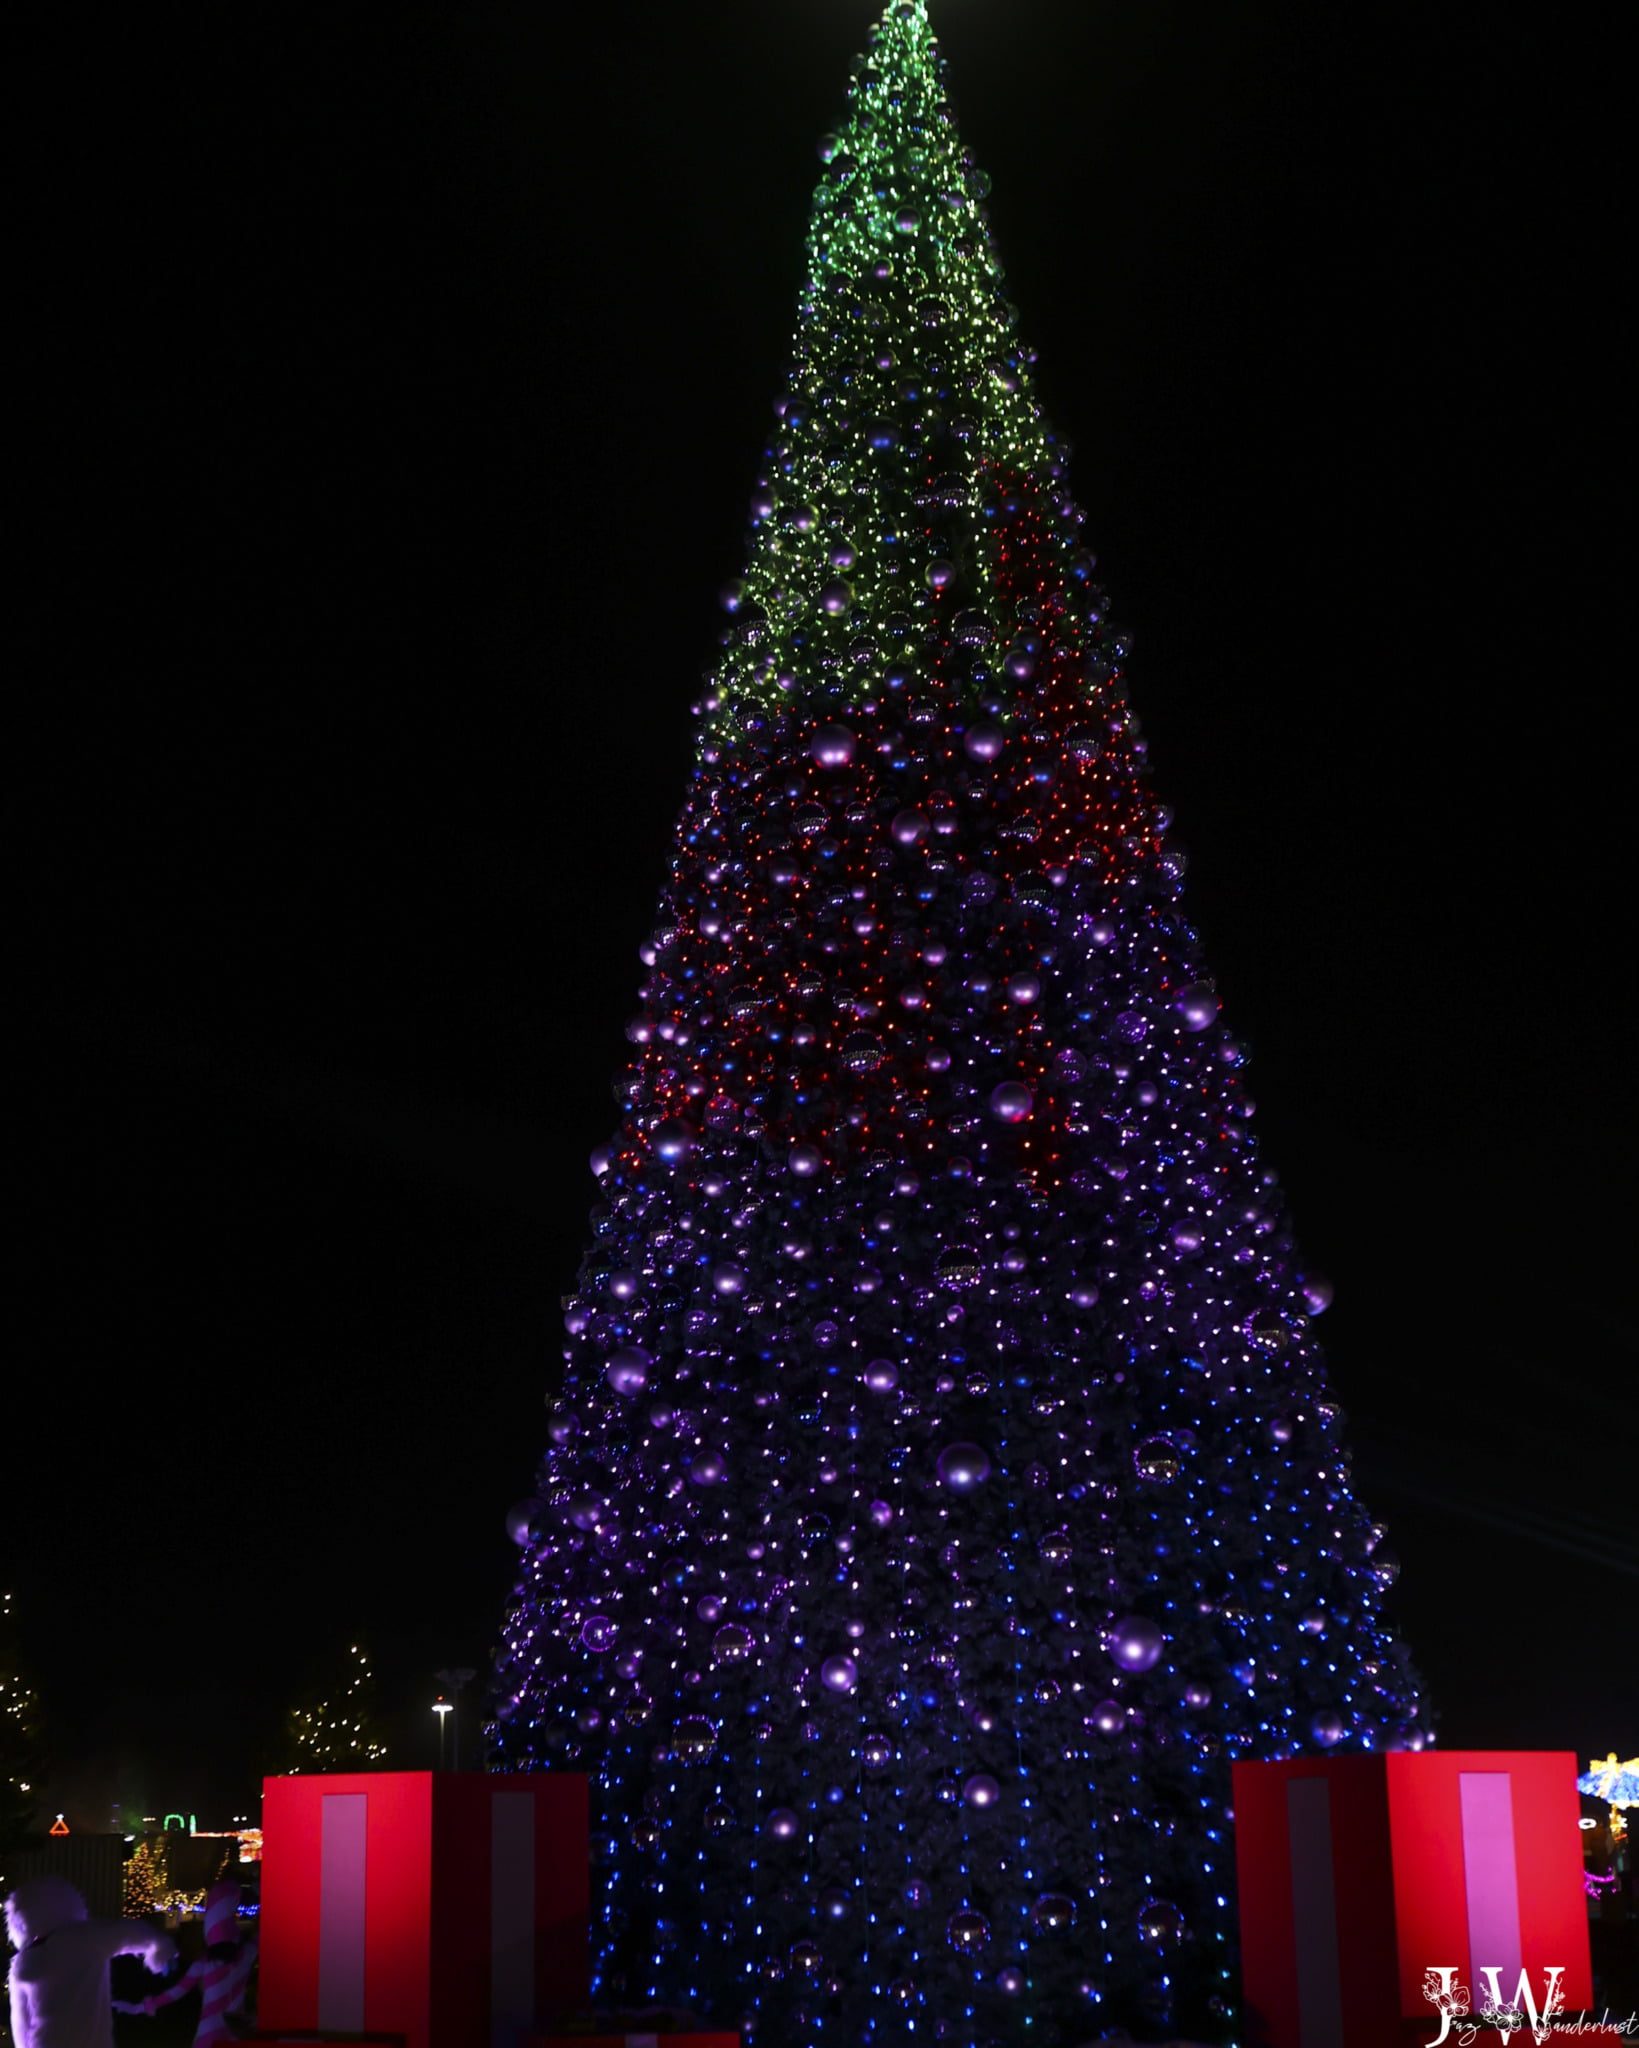 Christmas tree lights at Night of Lights in Costa Mesa. Photography by Jaz Wanderlust.